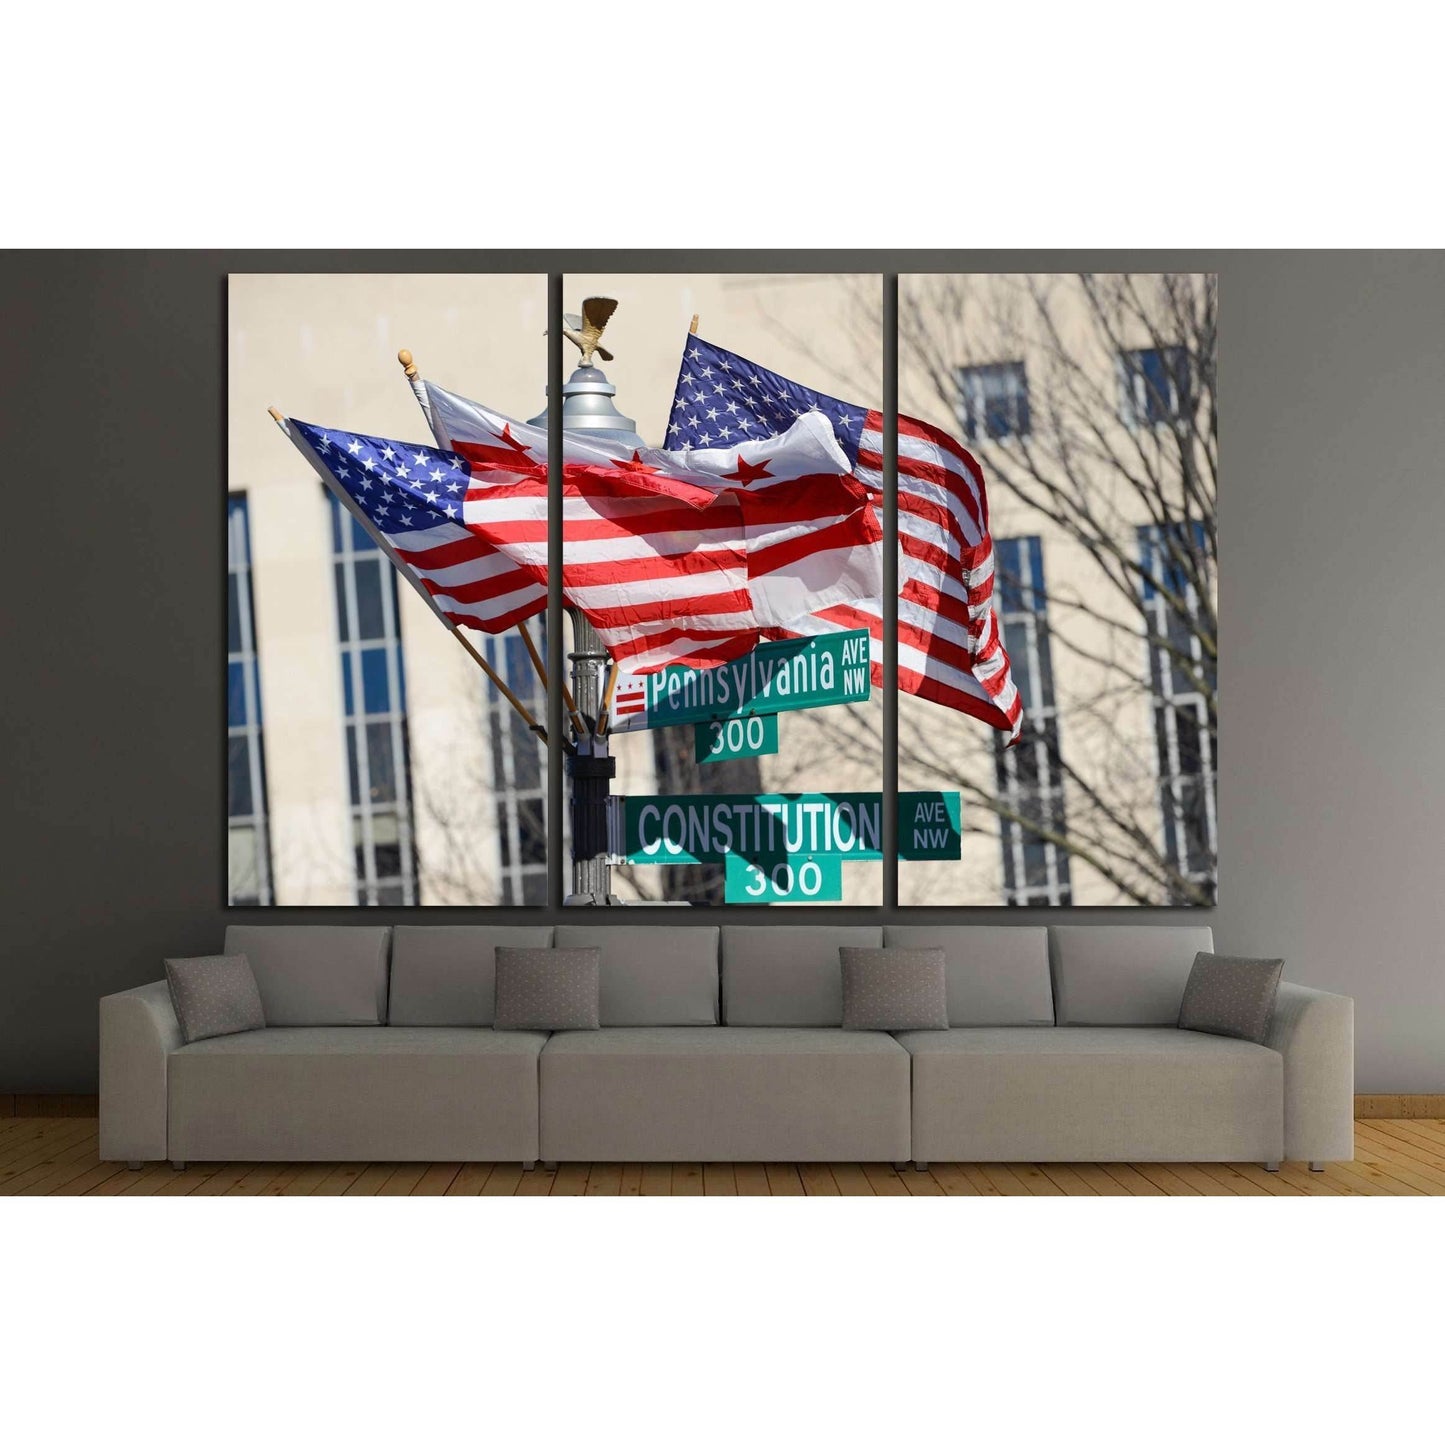 Washington DC, Pennsylvania Avenue and Constitution Avenue junction street signs with DC and United States of America flags on the same post №2271 Ready to Hang Canvas PrintCanvas art arrives ready to hang, with hanging accessories included and no additio